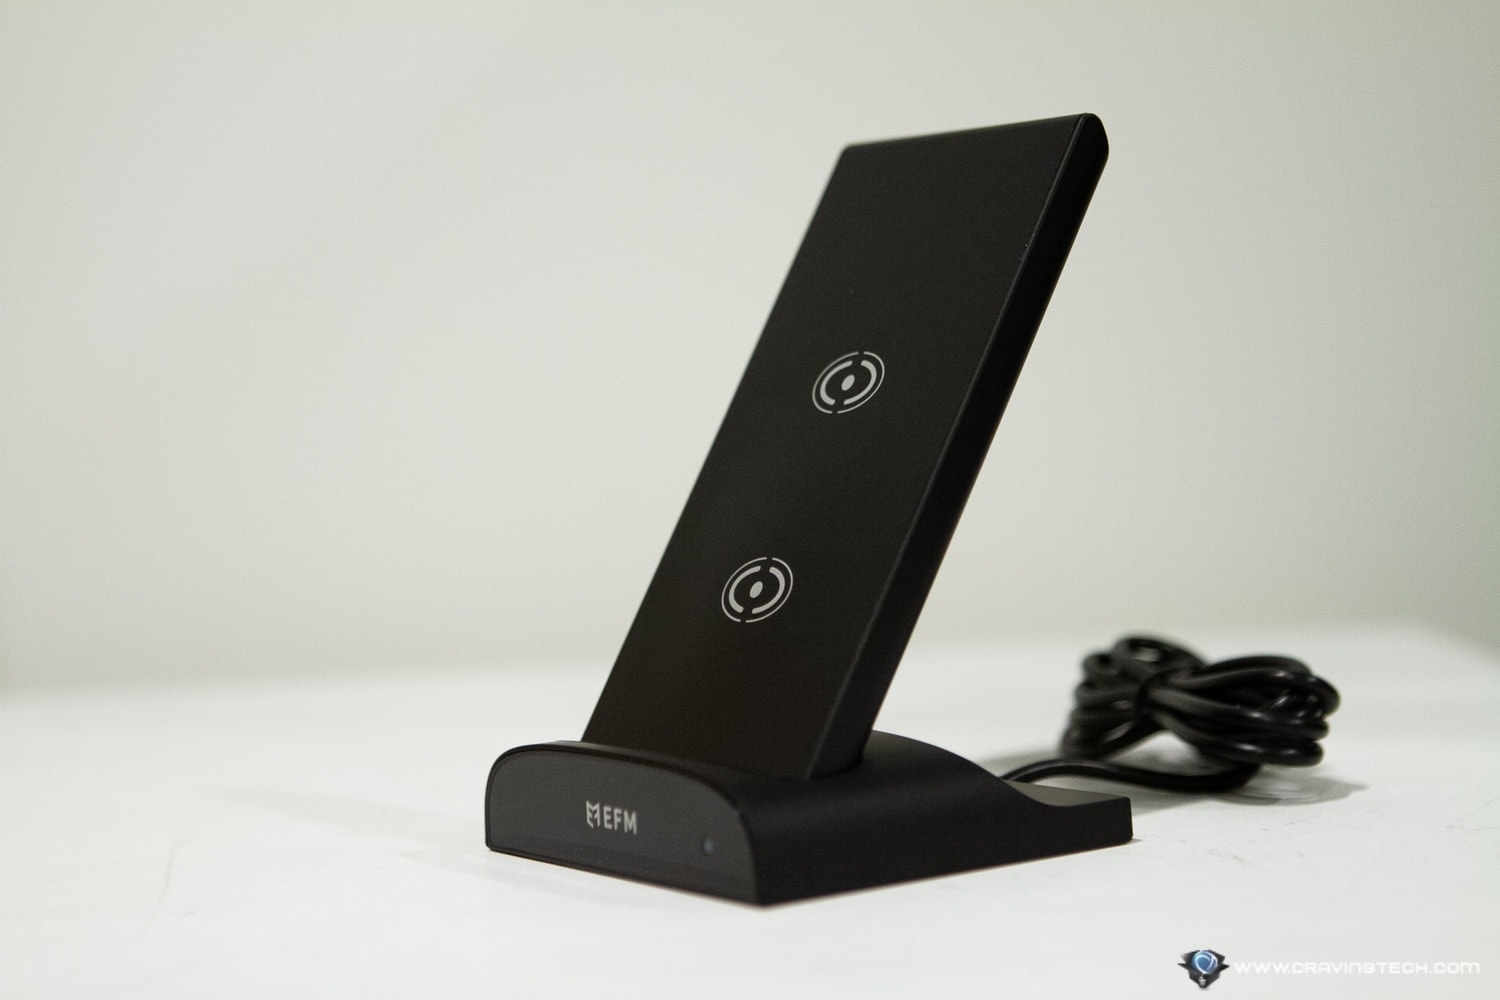 My favourite Portable Battery Charger so far! EFM Wireless Power Bank with Desktop Stand Review